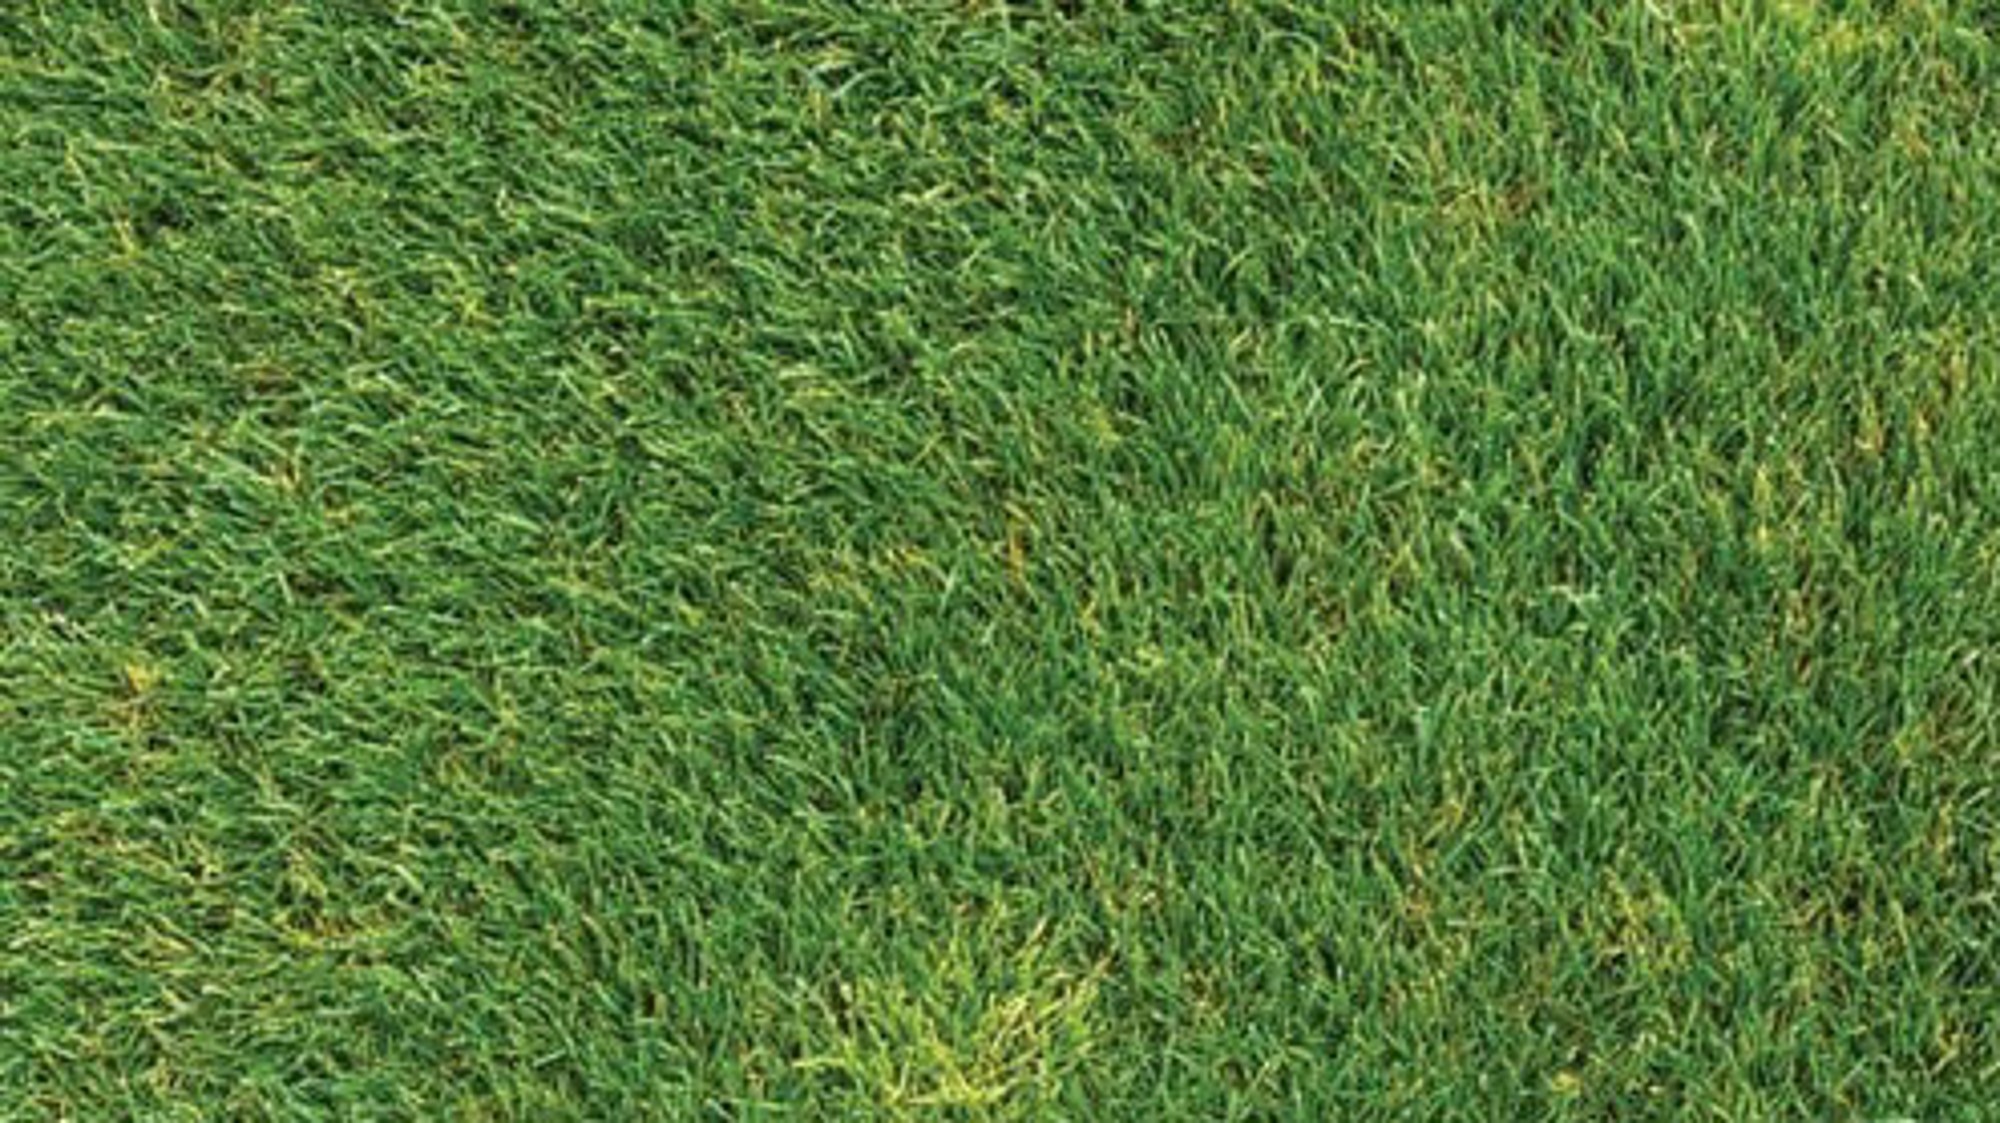 Gloucester Rugby showing effect of Attraxor application on Poa in sward